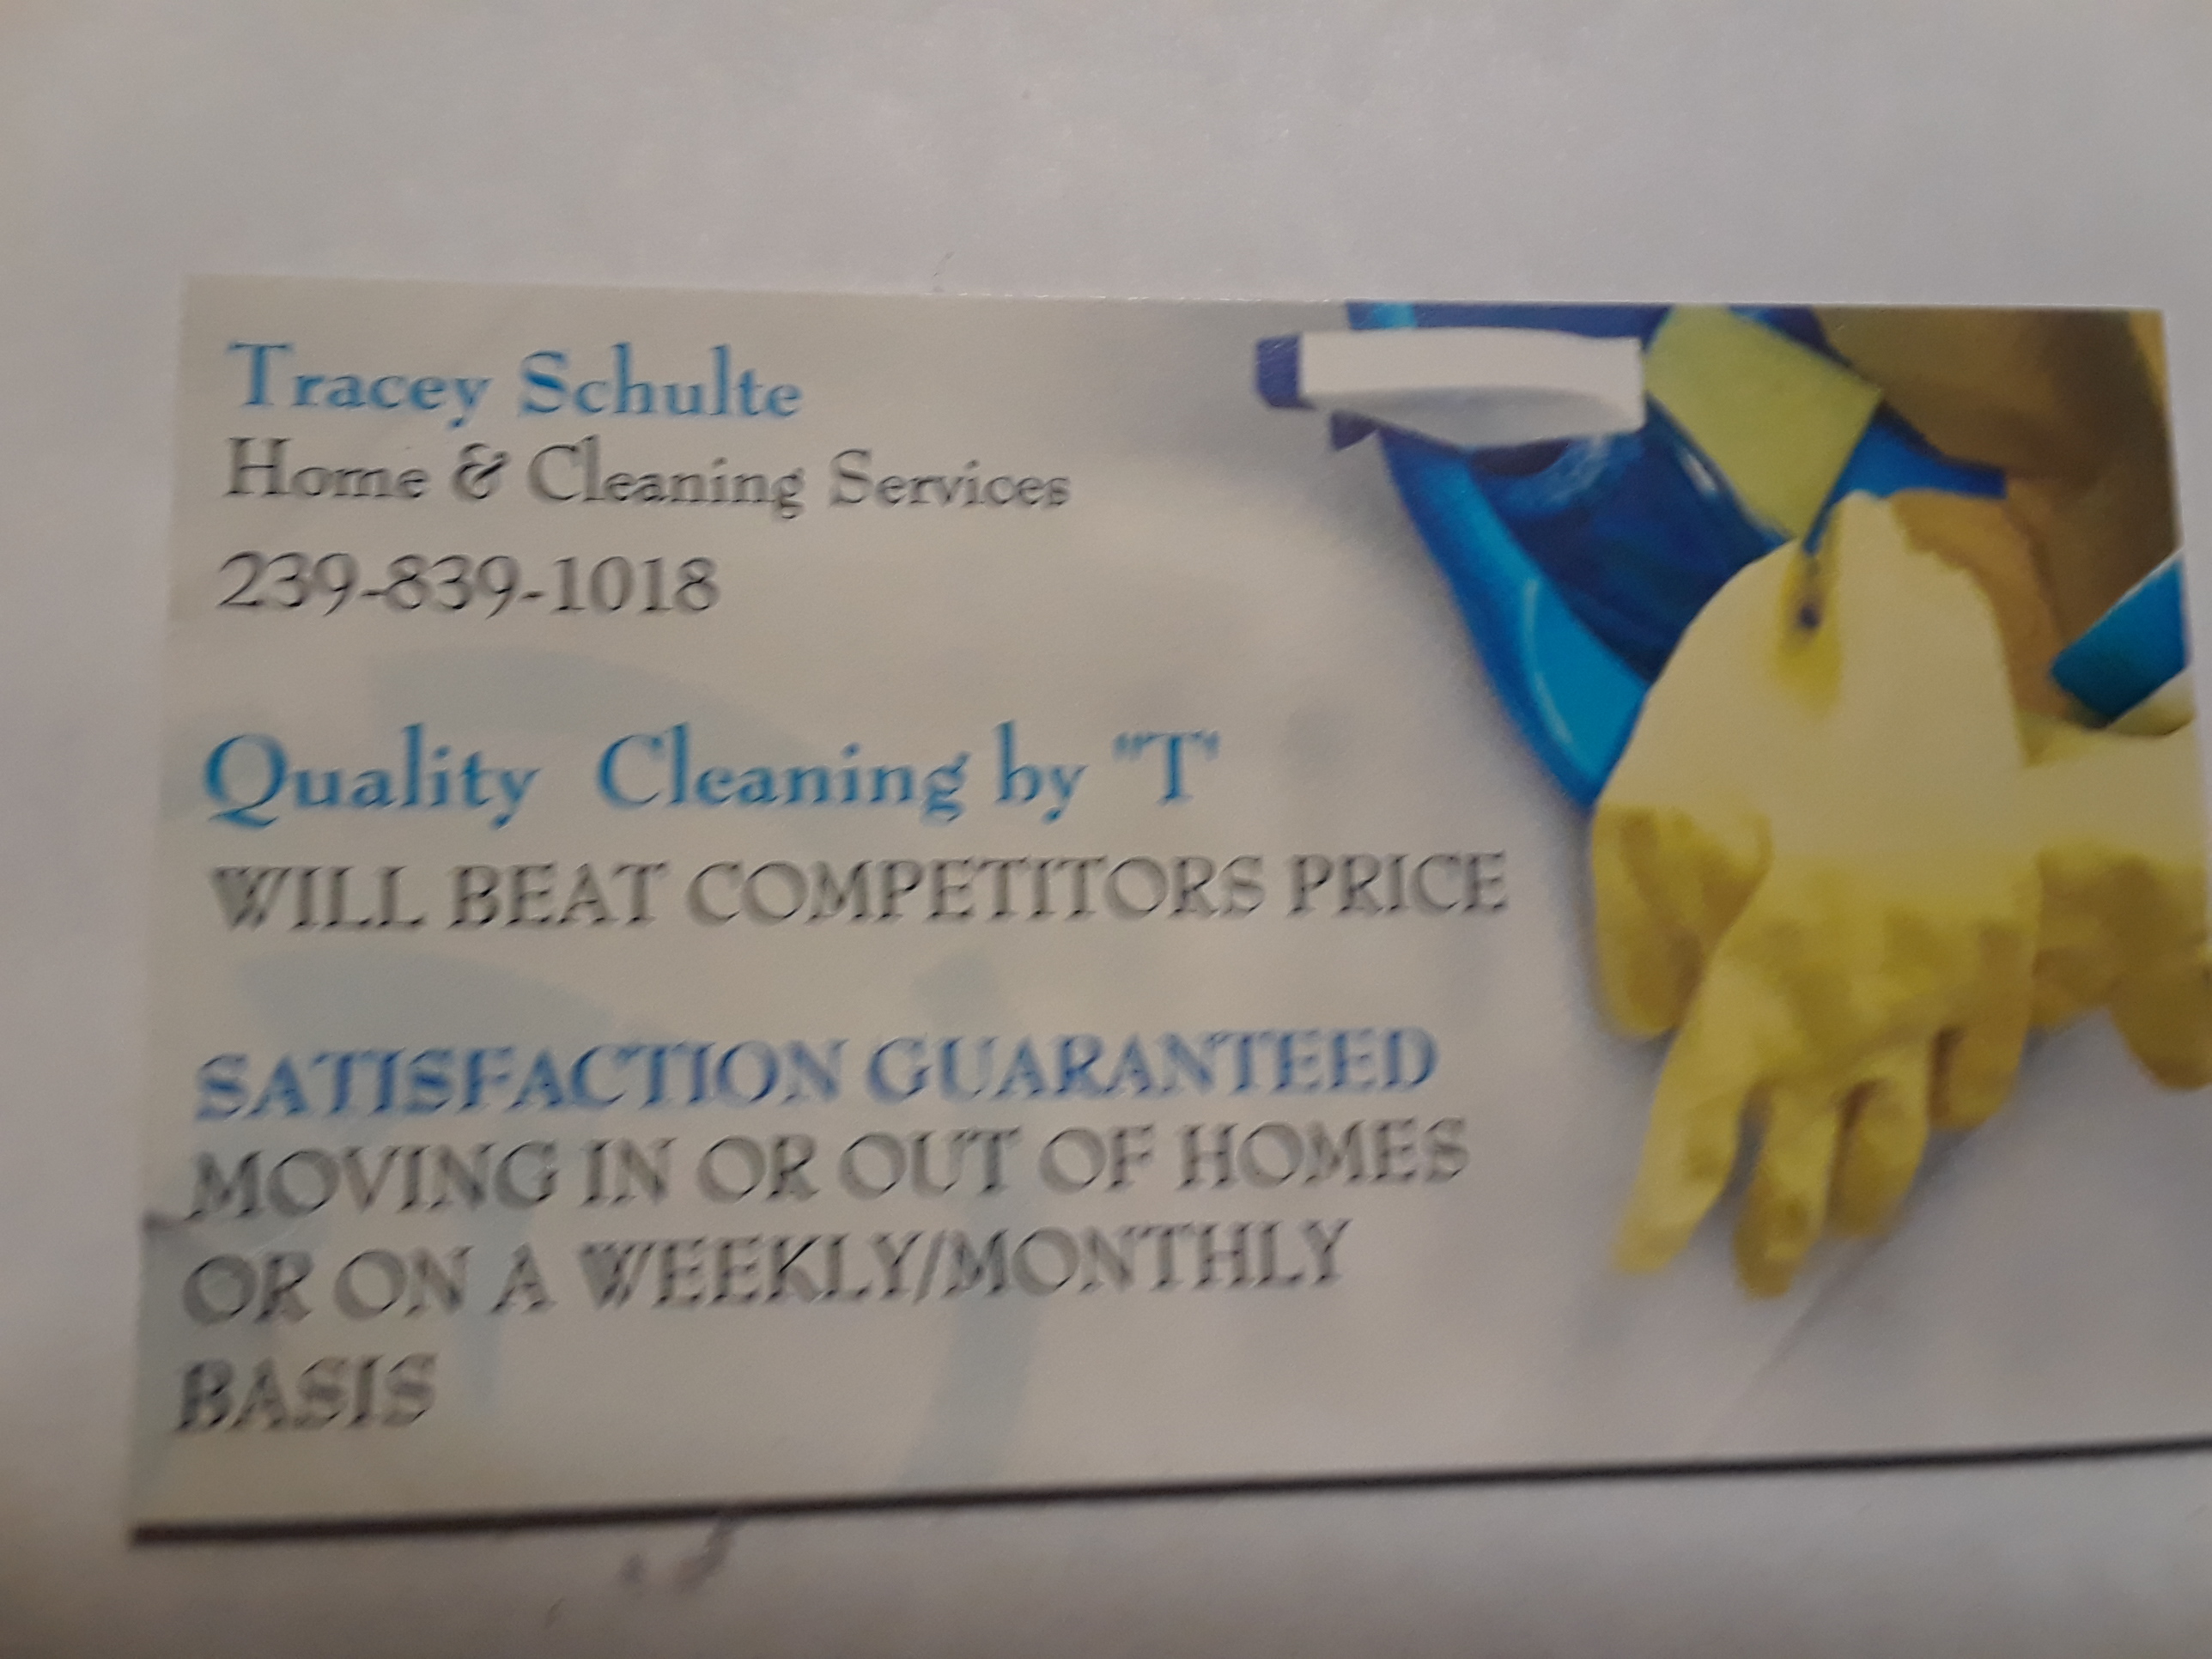 Quality Cleaning by (T) Logo